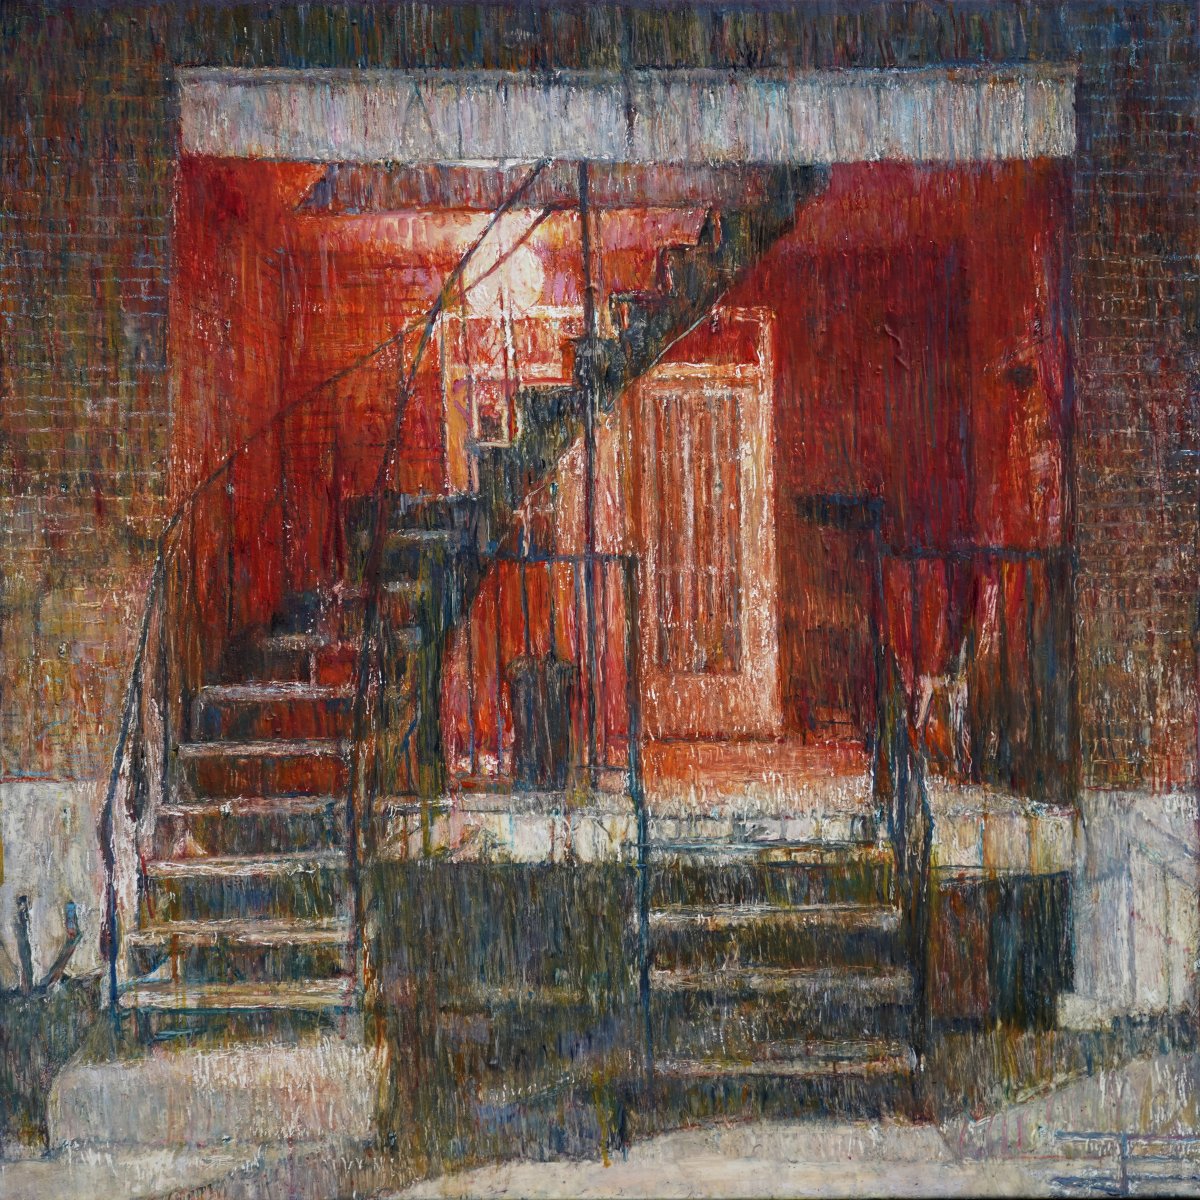 Oil painting by Jeremy Eliosoff, Red Light Doorway, 2022, 30" x 30"